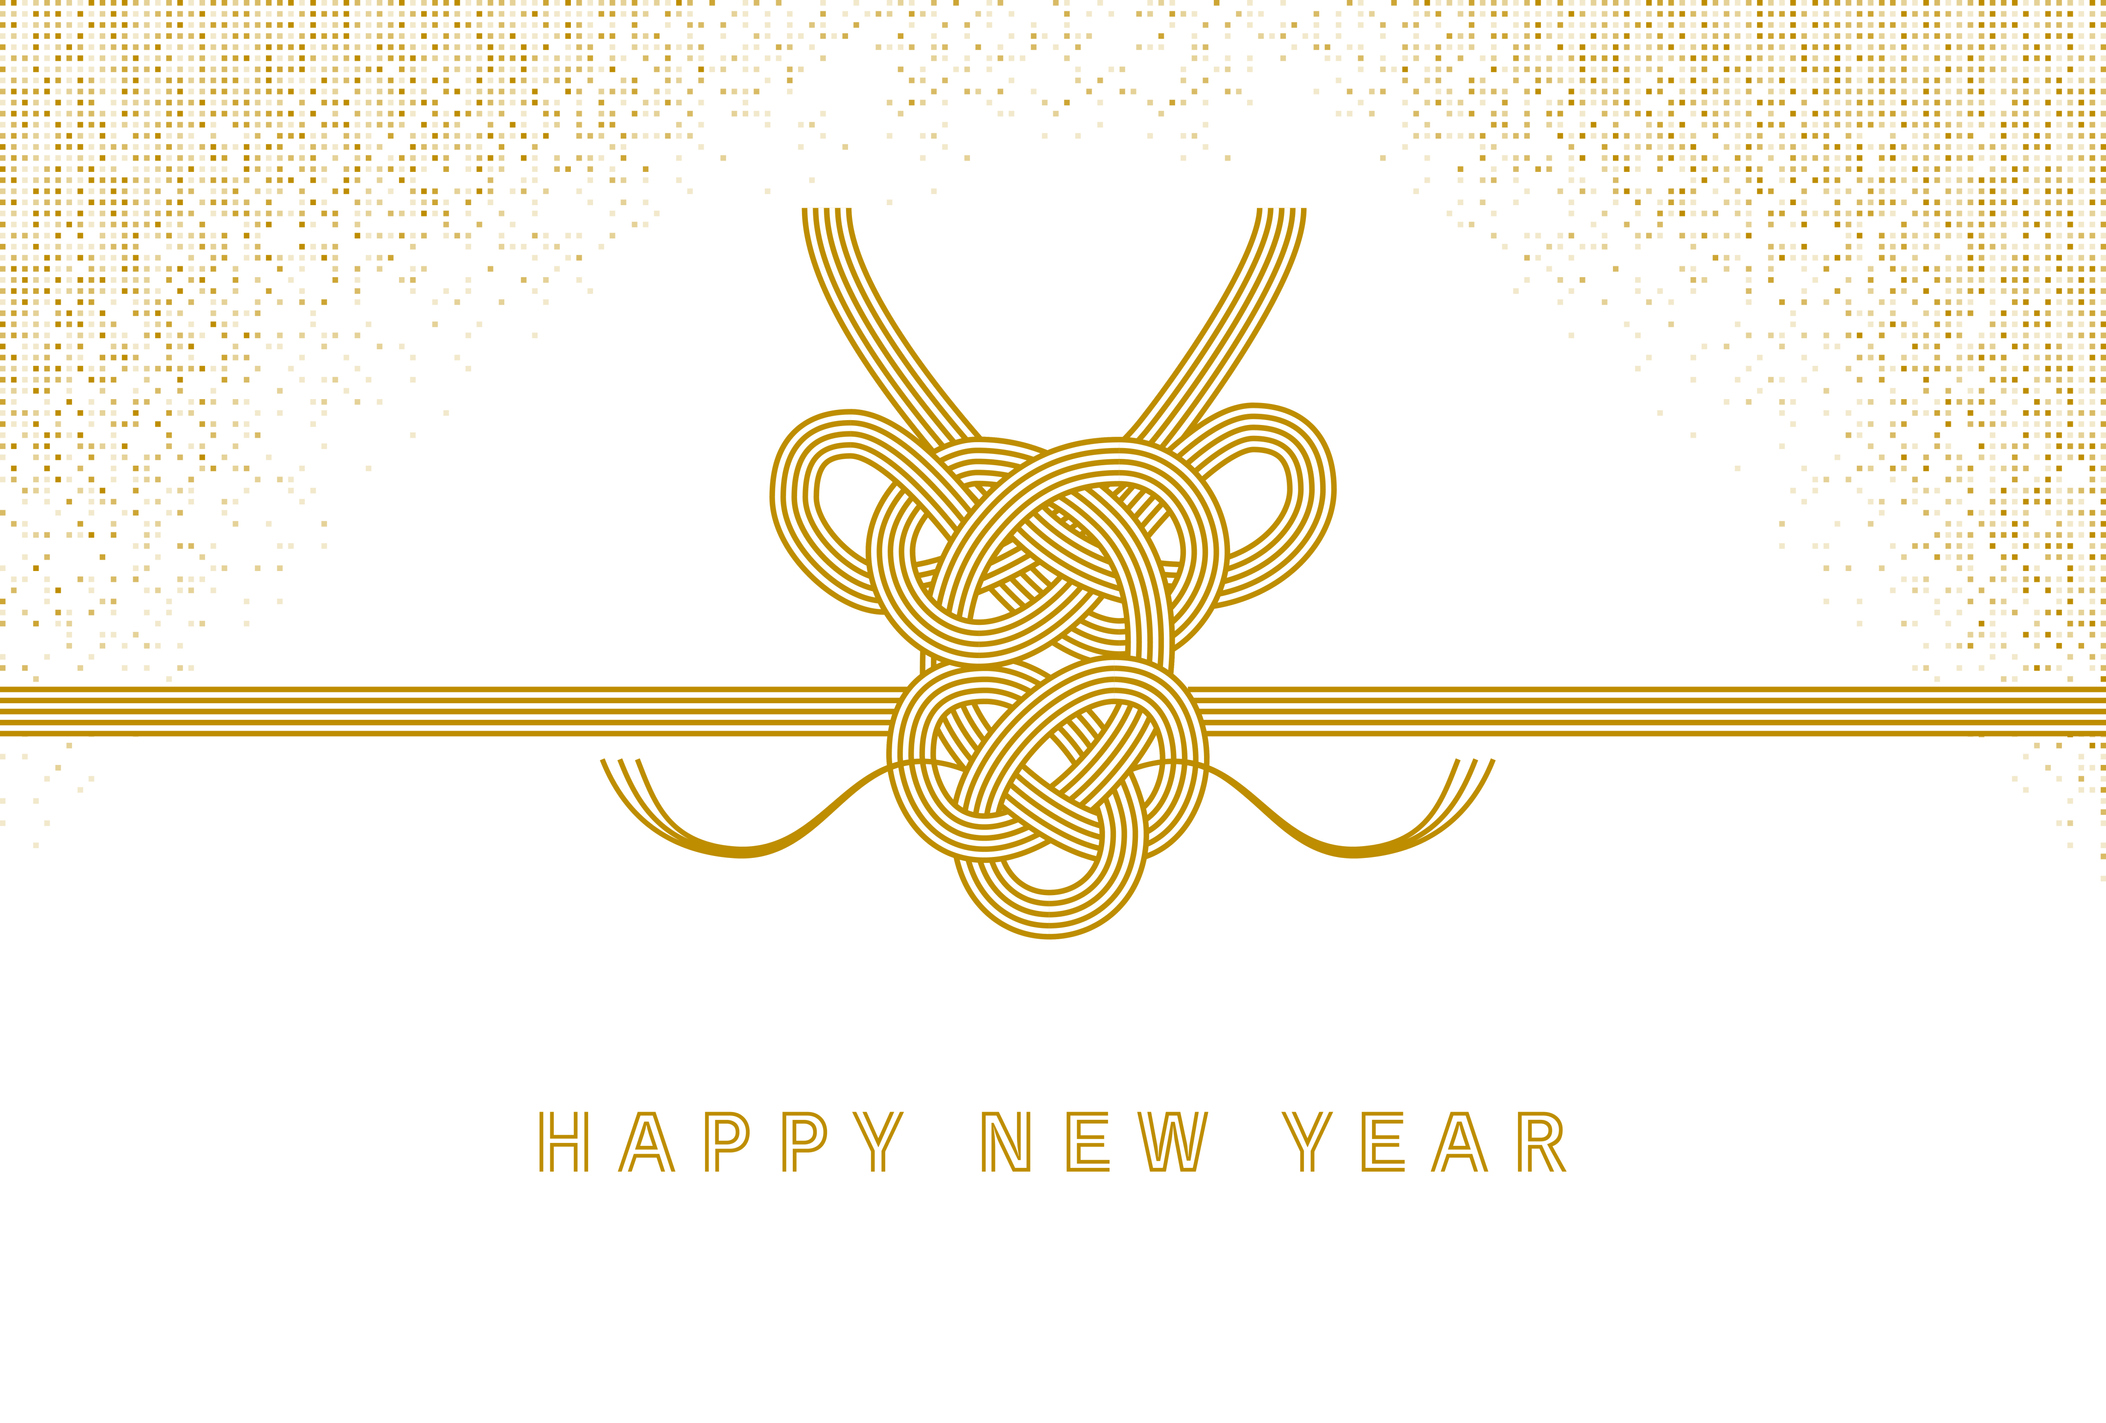 New Year's card for the Year of the Dragon